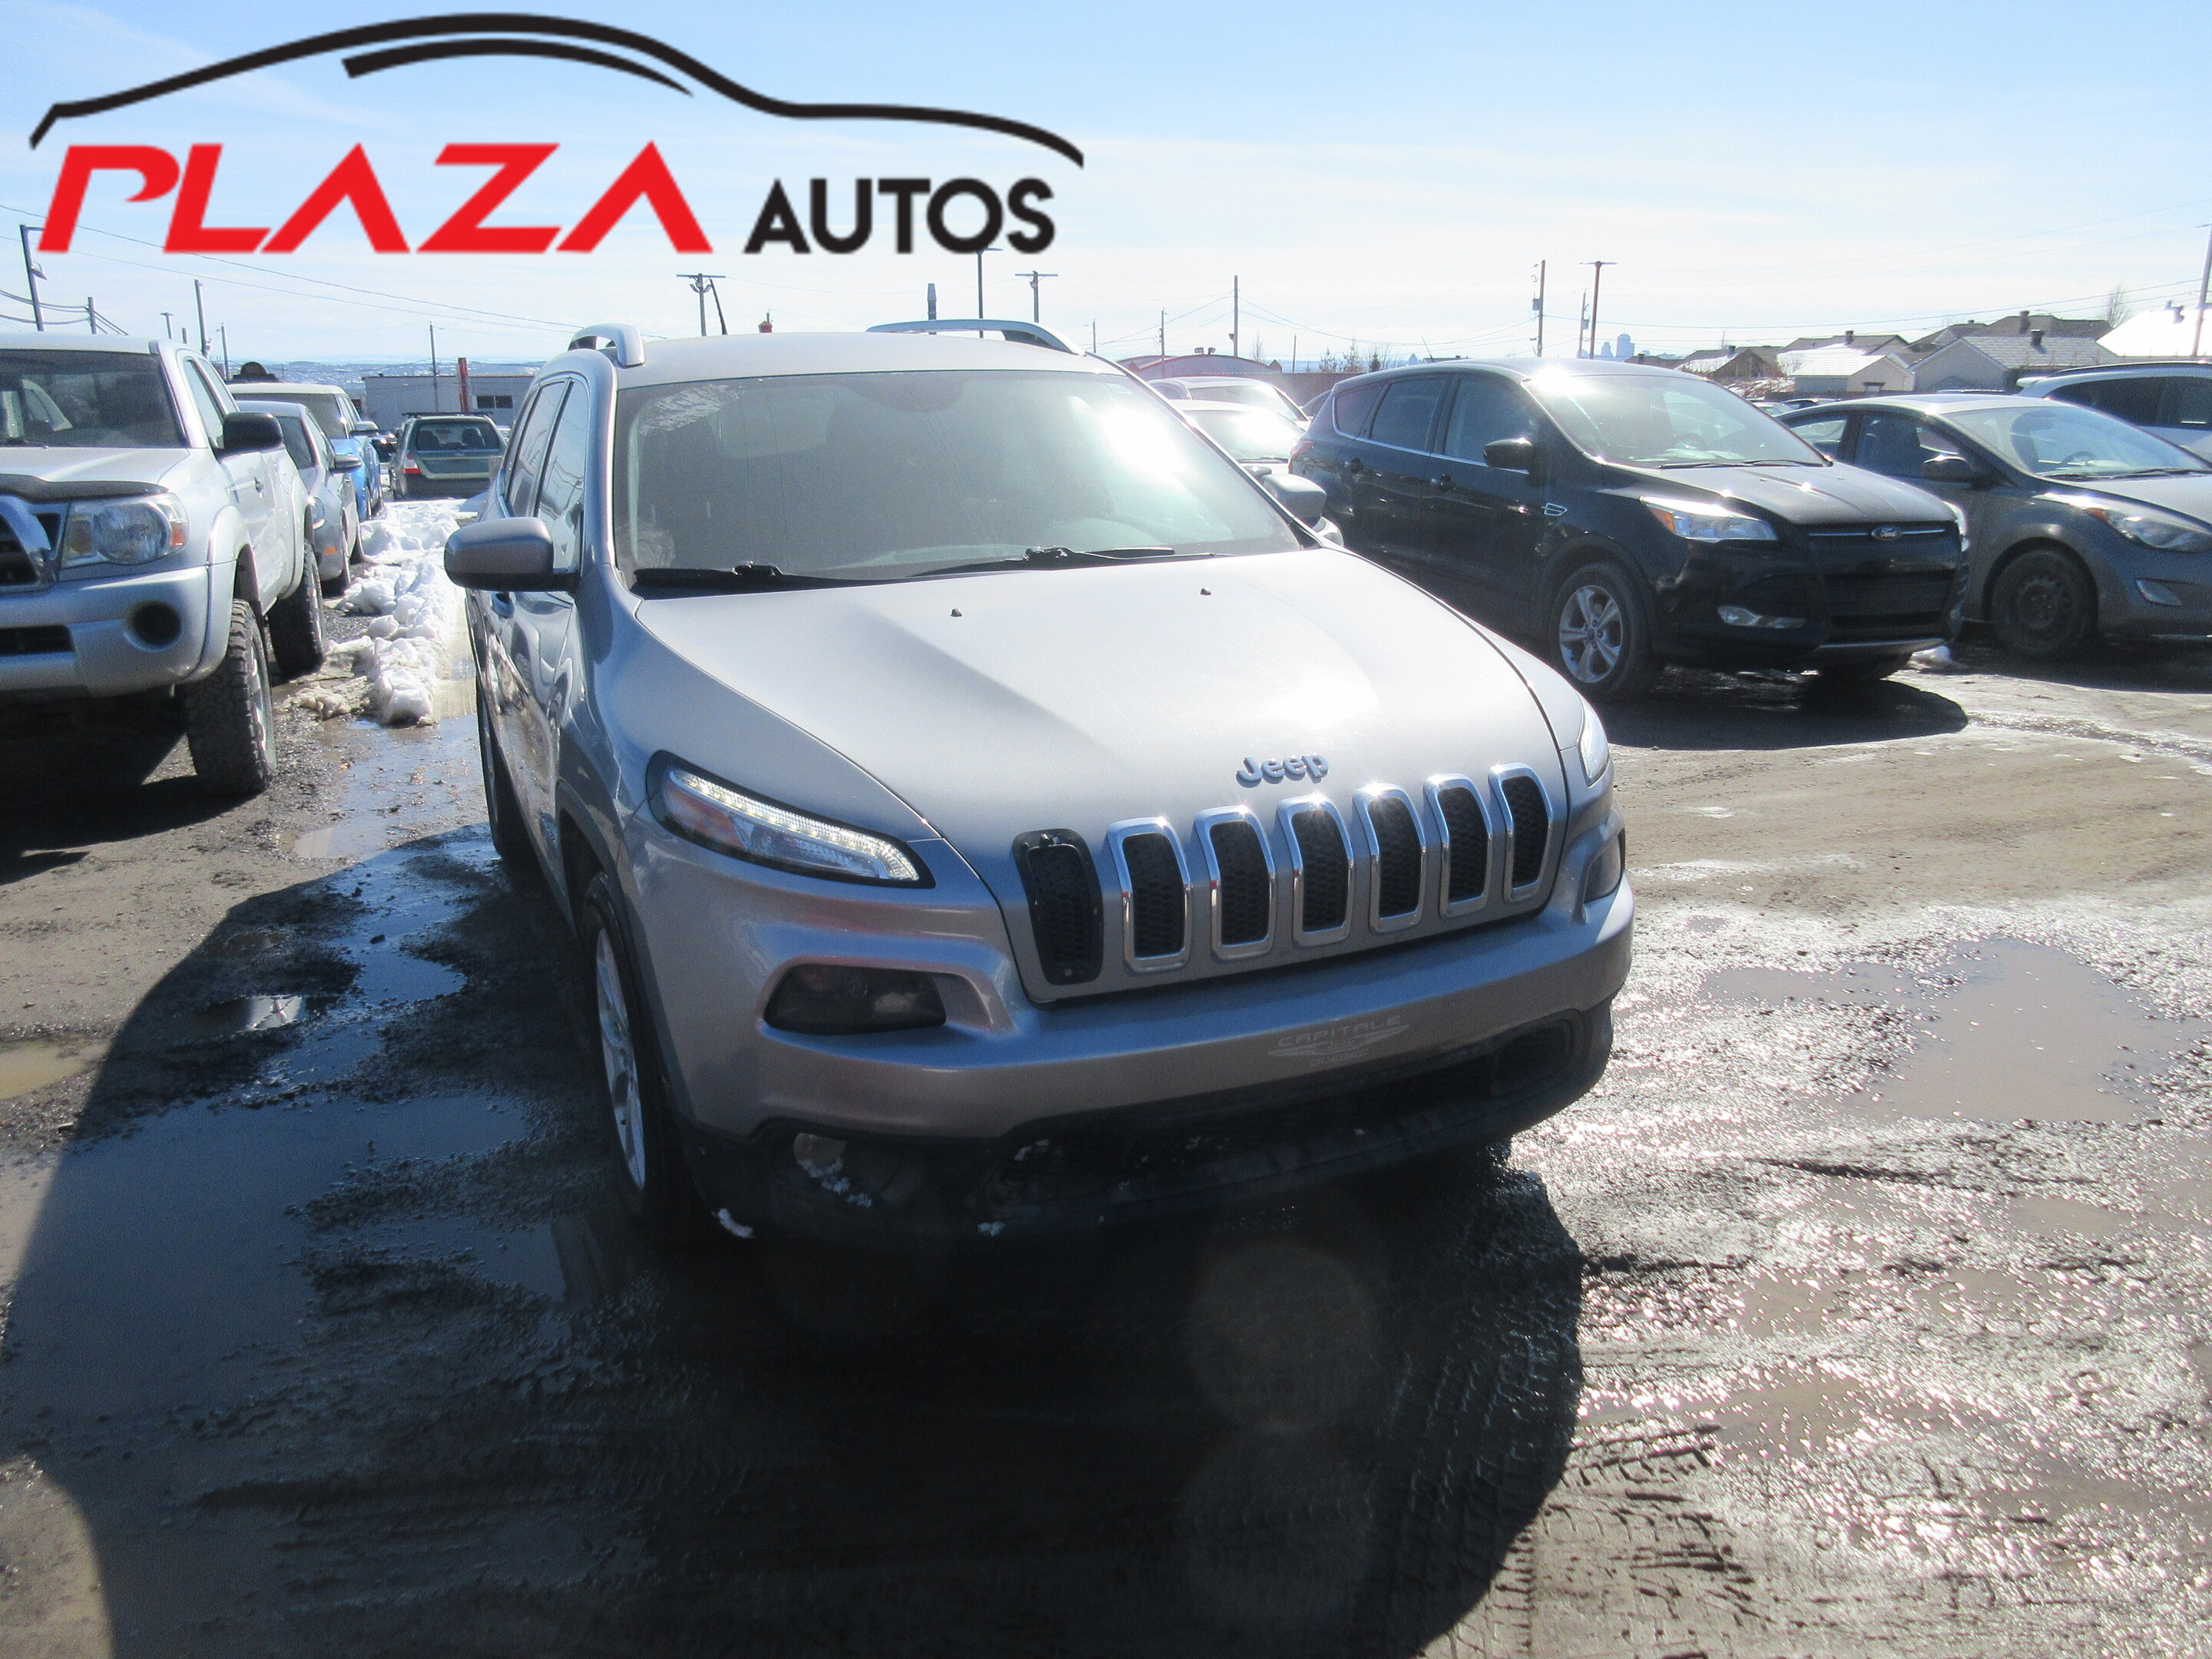 2016 Jeep Cherokee FWD 4dr North